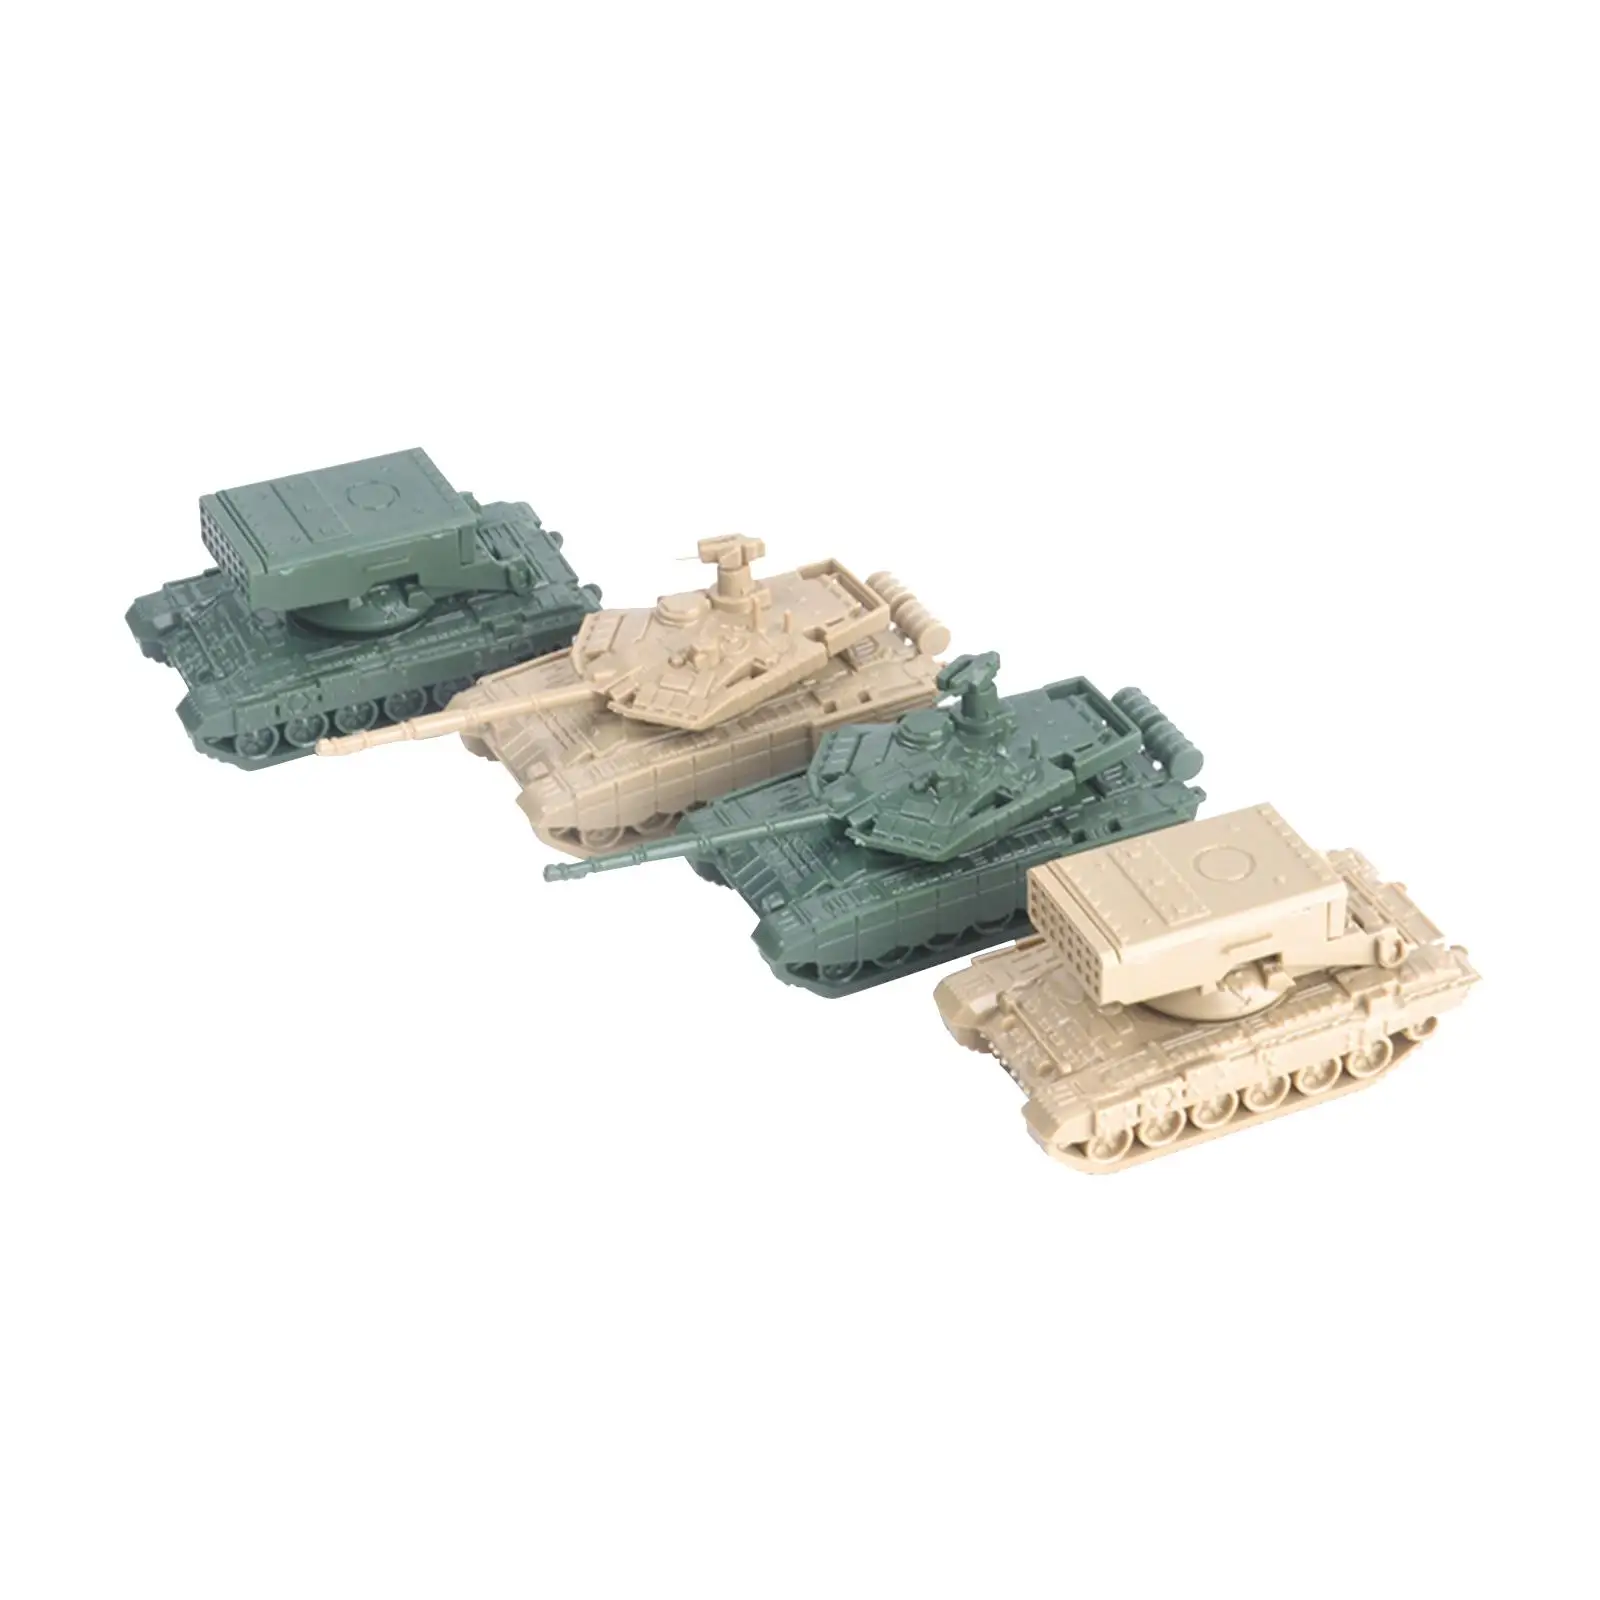 4Pcs 1:144 Scale DIY Tank Model Armored Vehicle Ornaments Miniature Tank Model Home Decor for Toddlers Girls Children Boys Kids